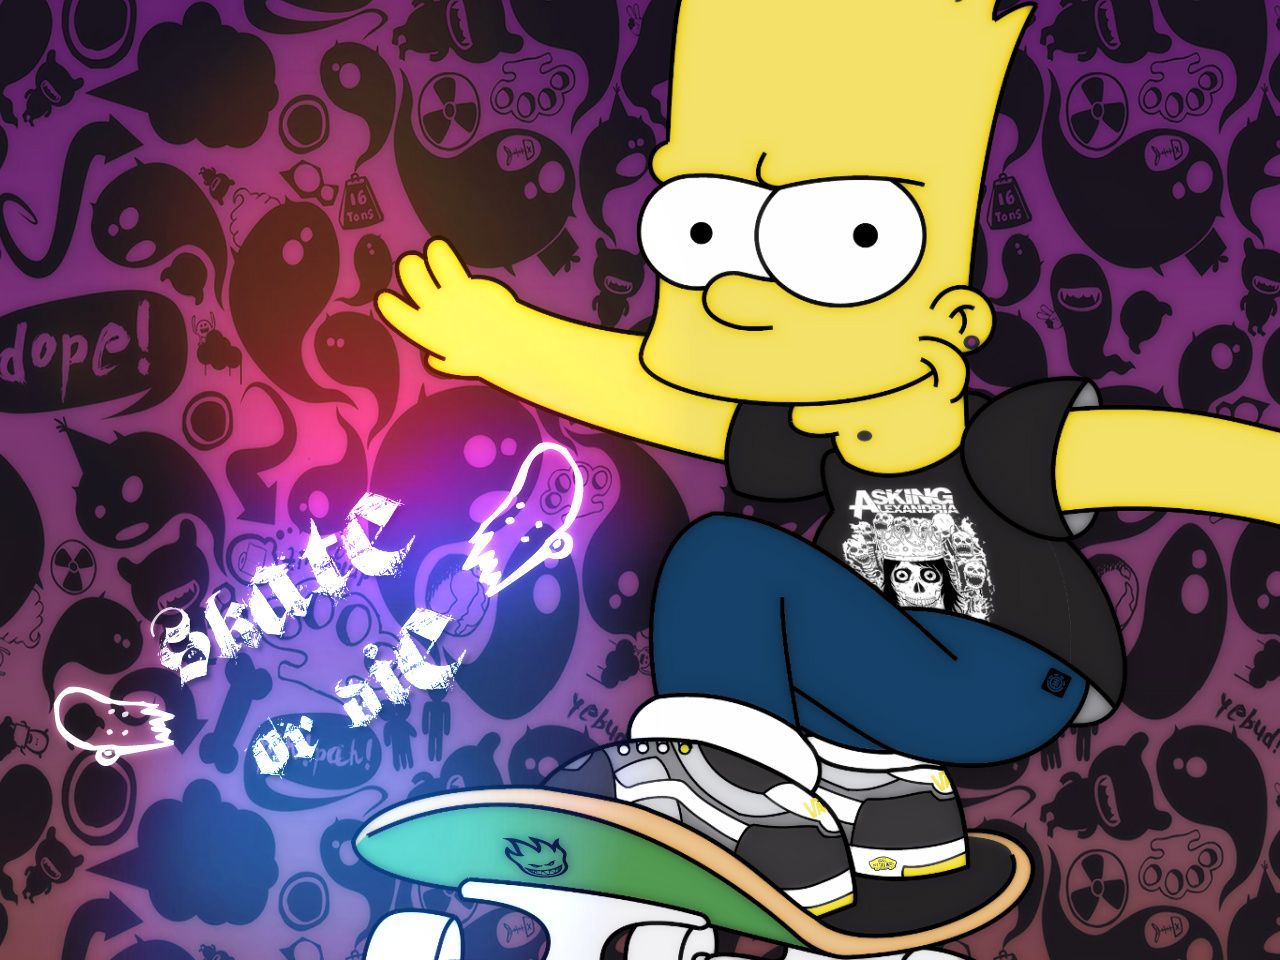 Turning The Simpsons Characters Into Hypebeasts  This artist gave The  Simpsons characters a major transformation  wait until you see Barts face  tattoos   By UNILAD  Facebook